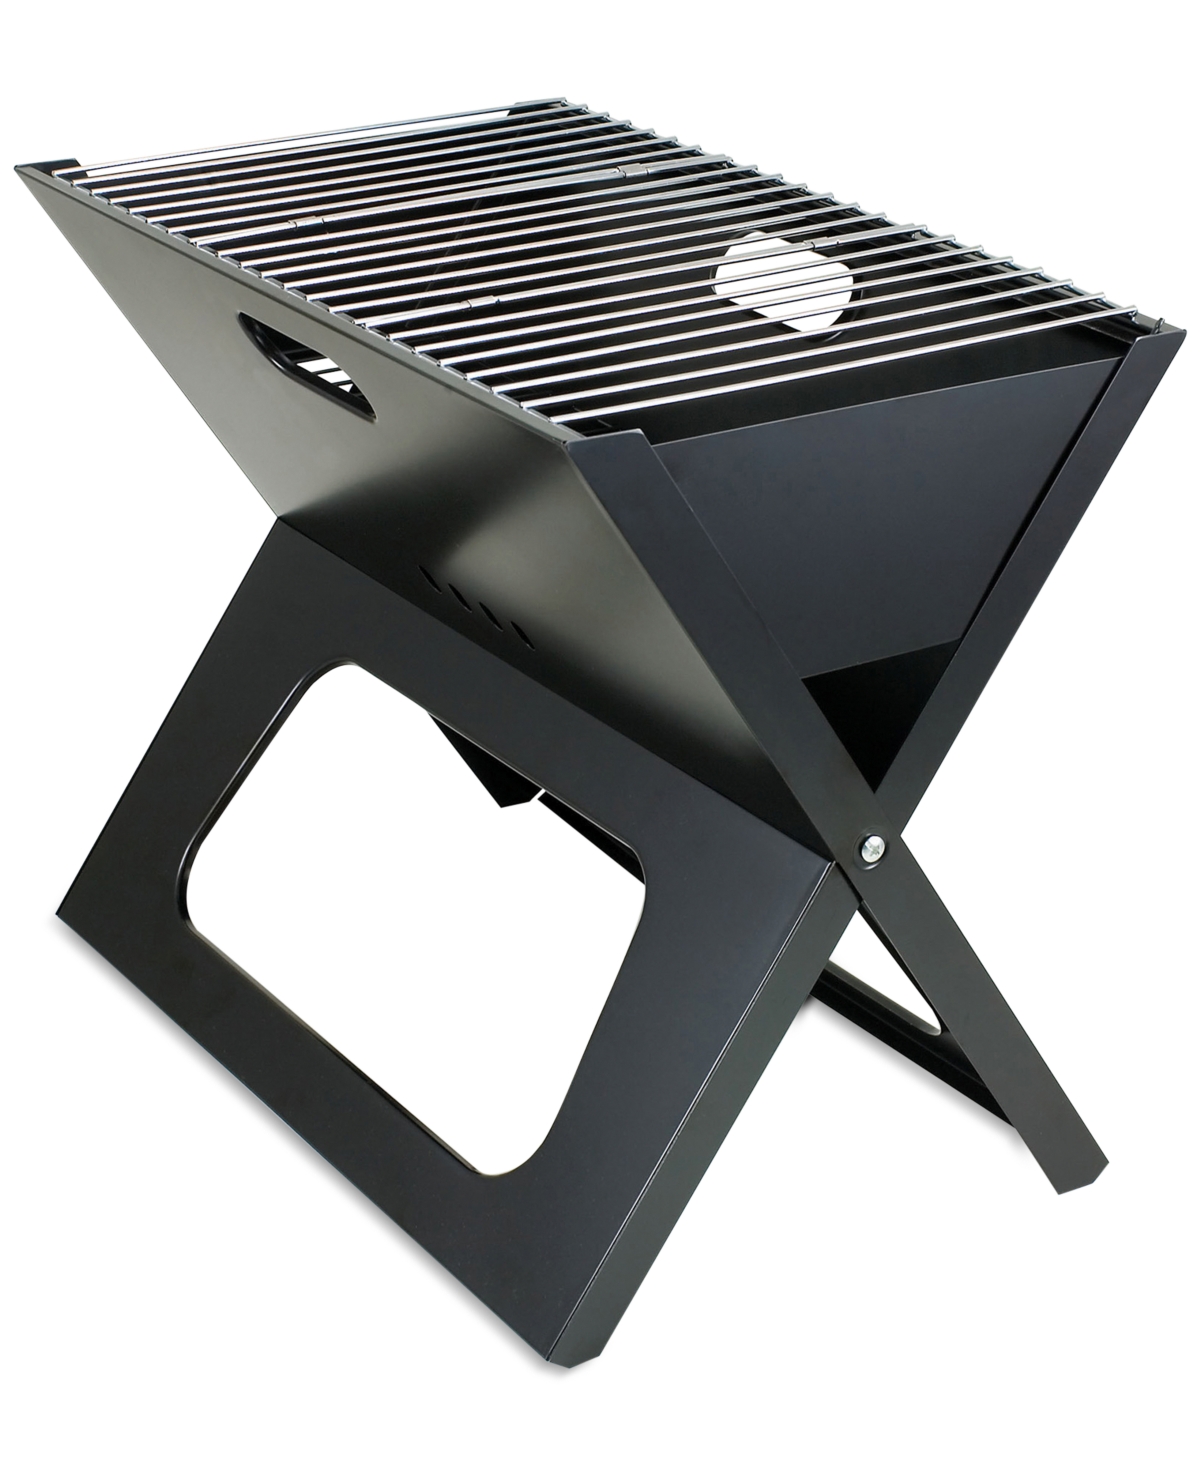 by Picnic Time X-Grill Portable Charcoal Bbq Grill